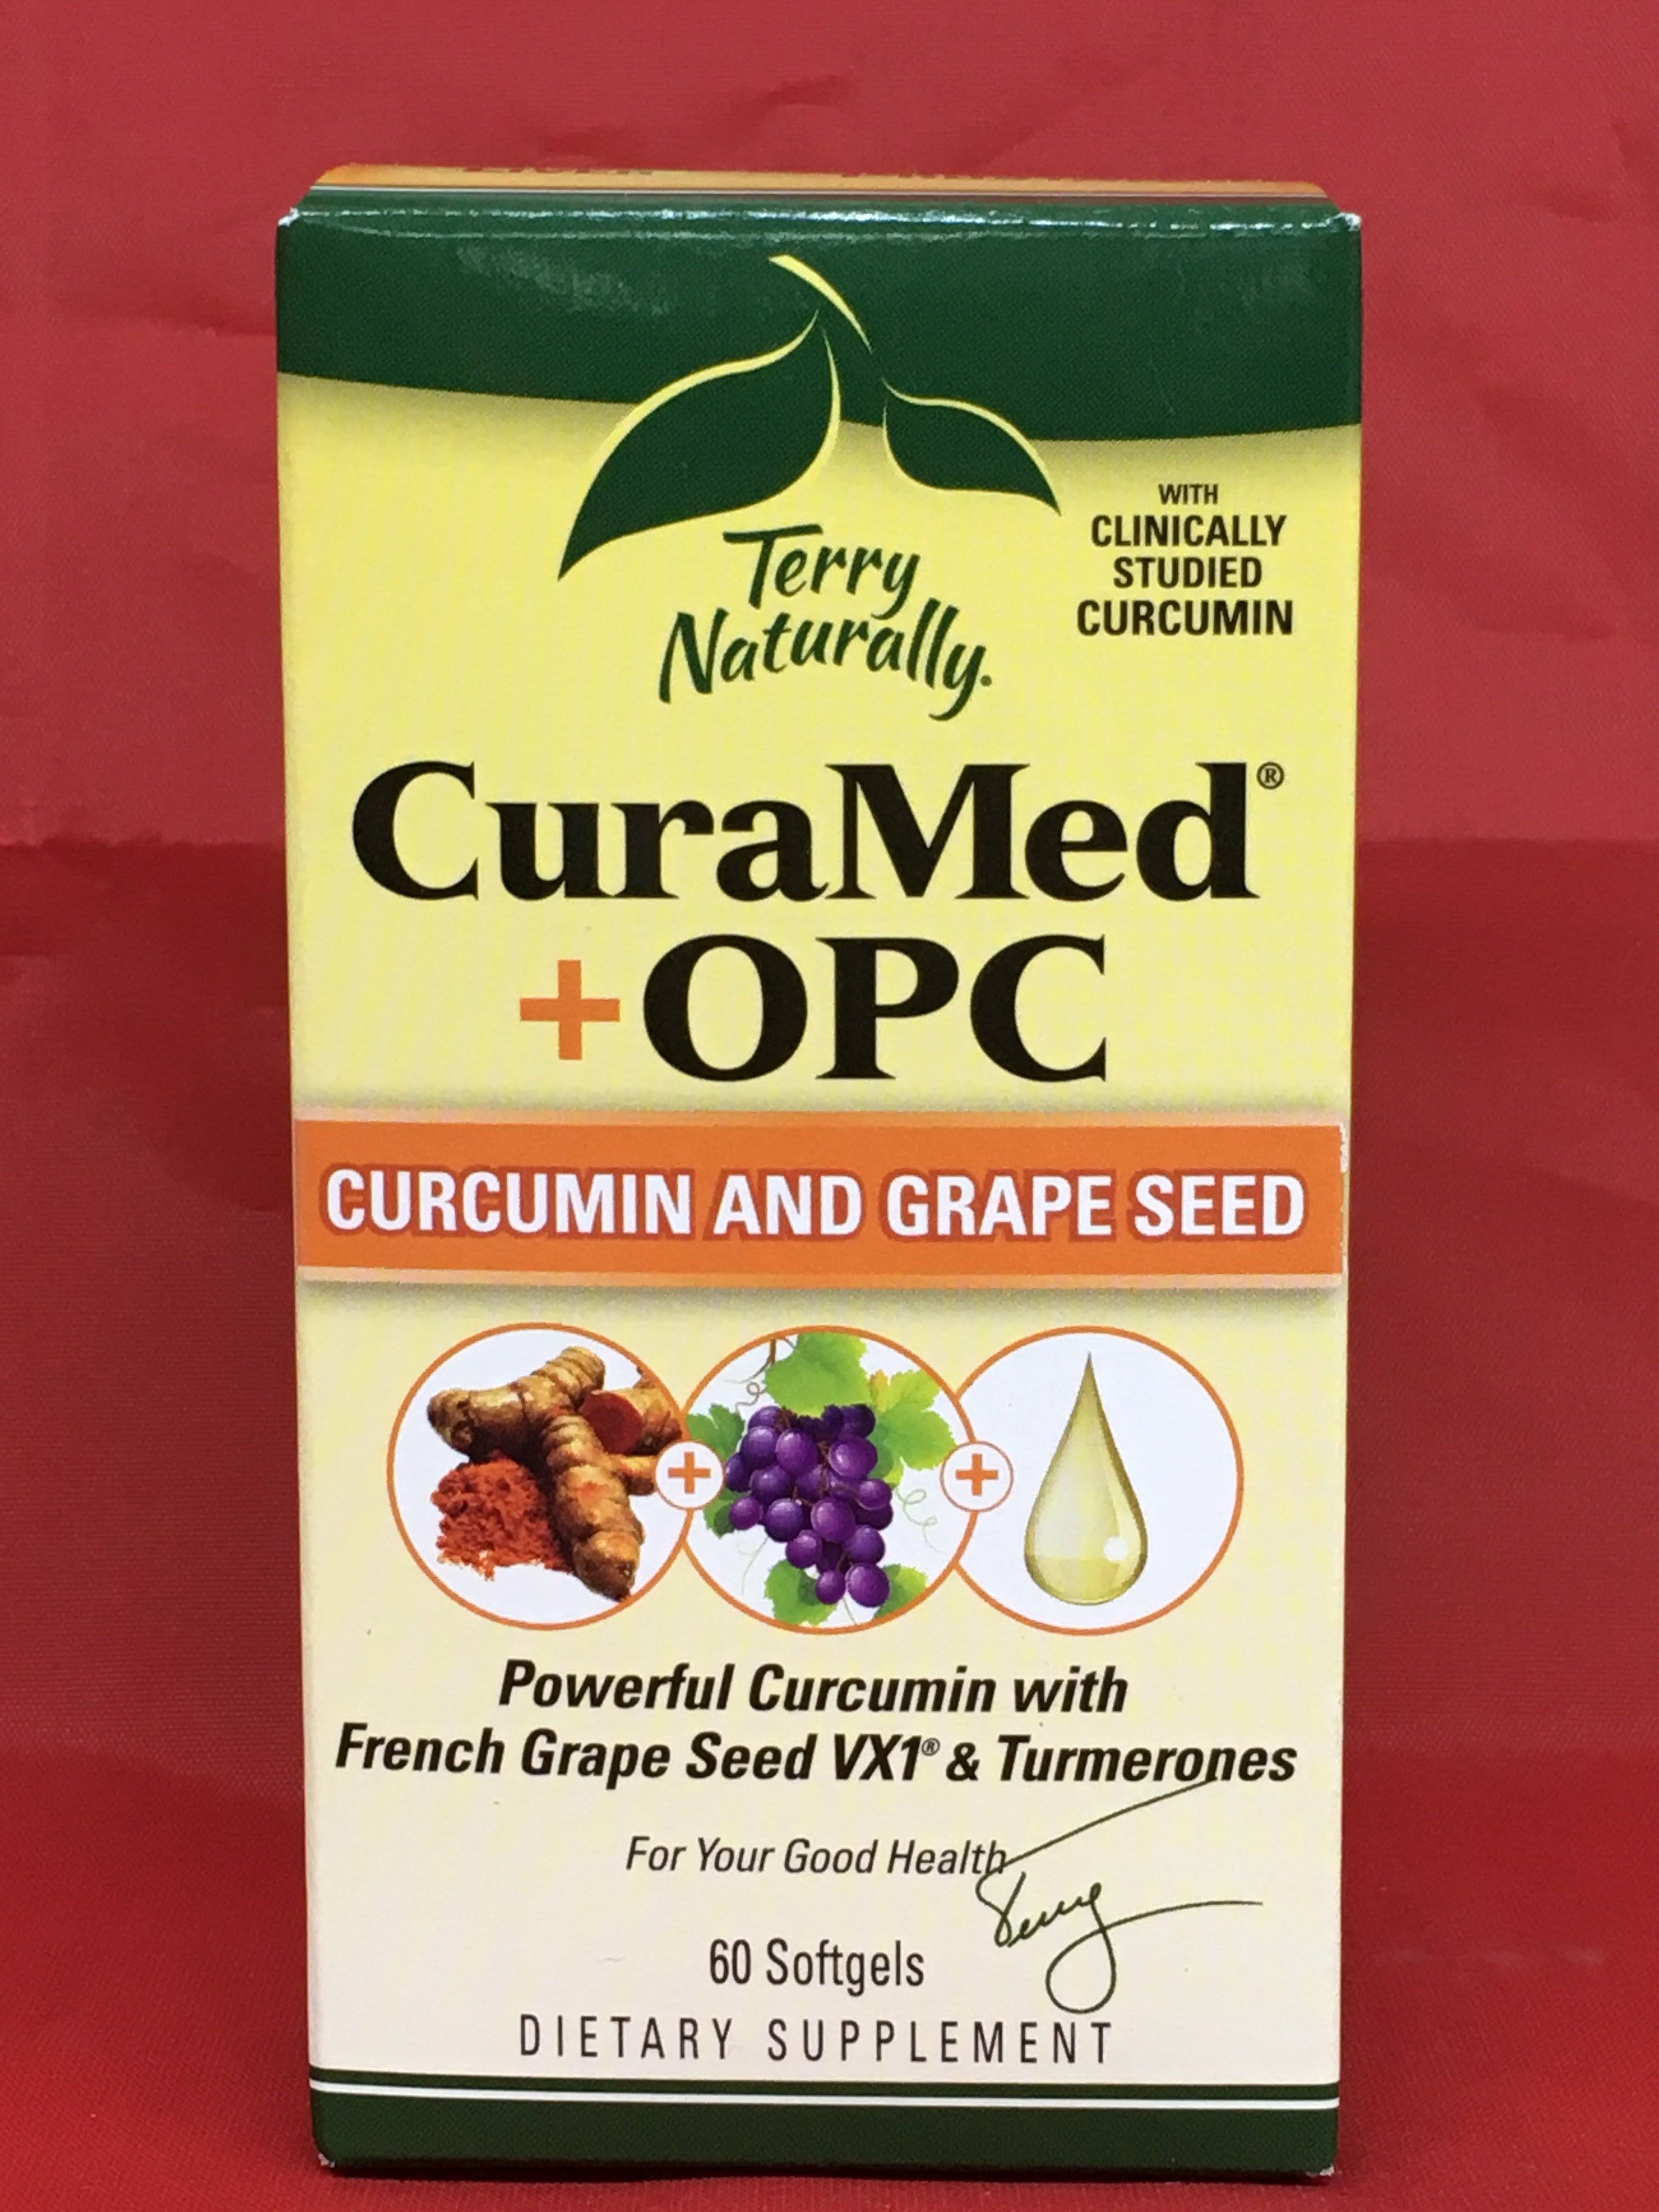 Terry Naturally CuraMed + OPC 60 Softgels